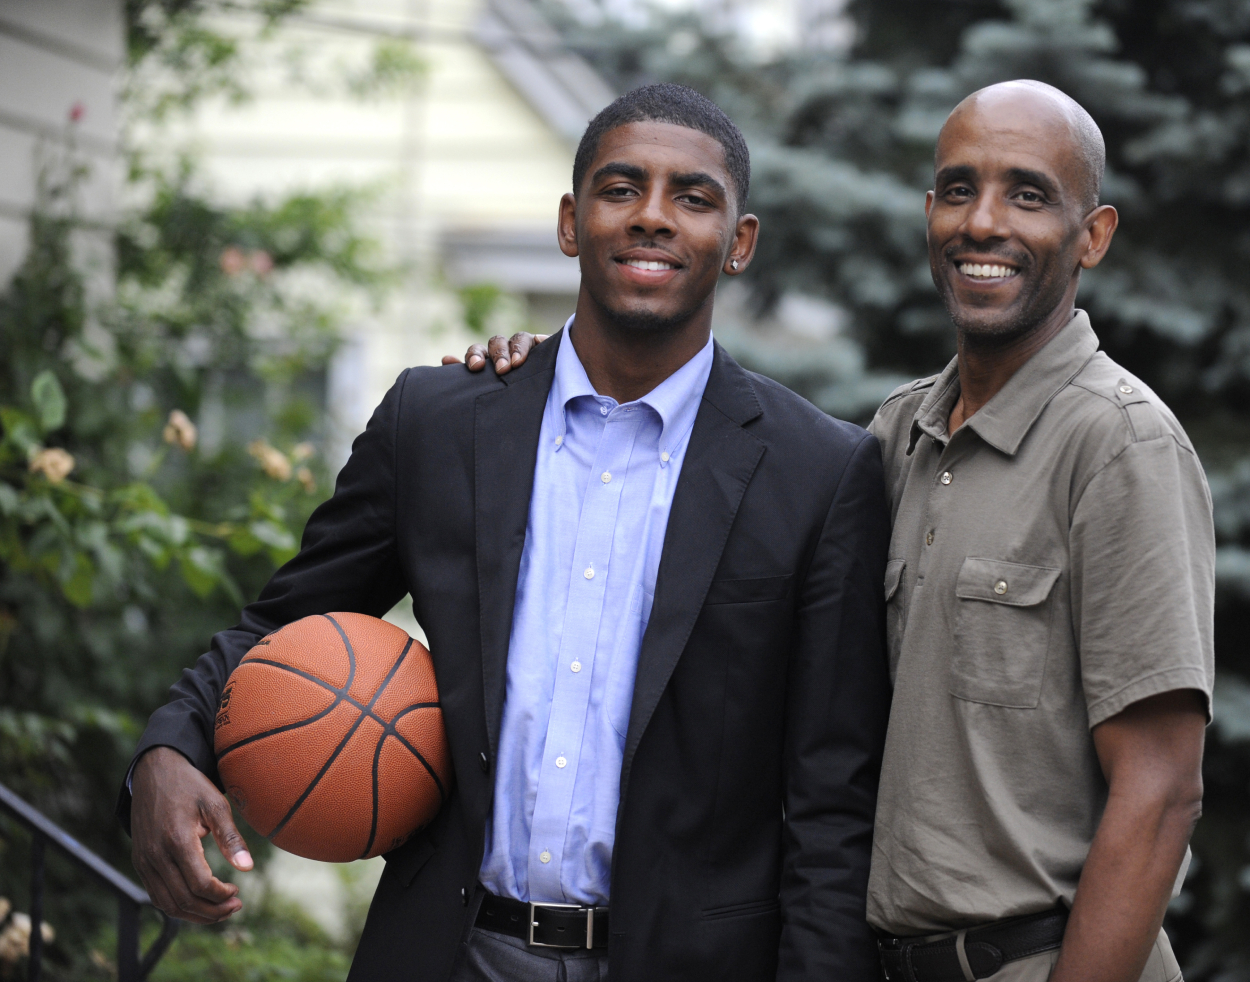 Kyrie Irving posing for a photo with his father